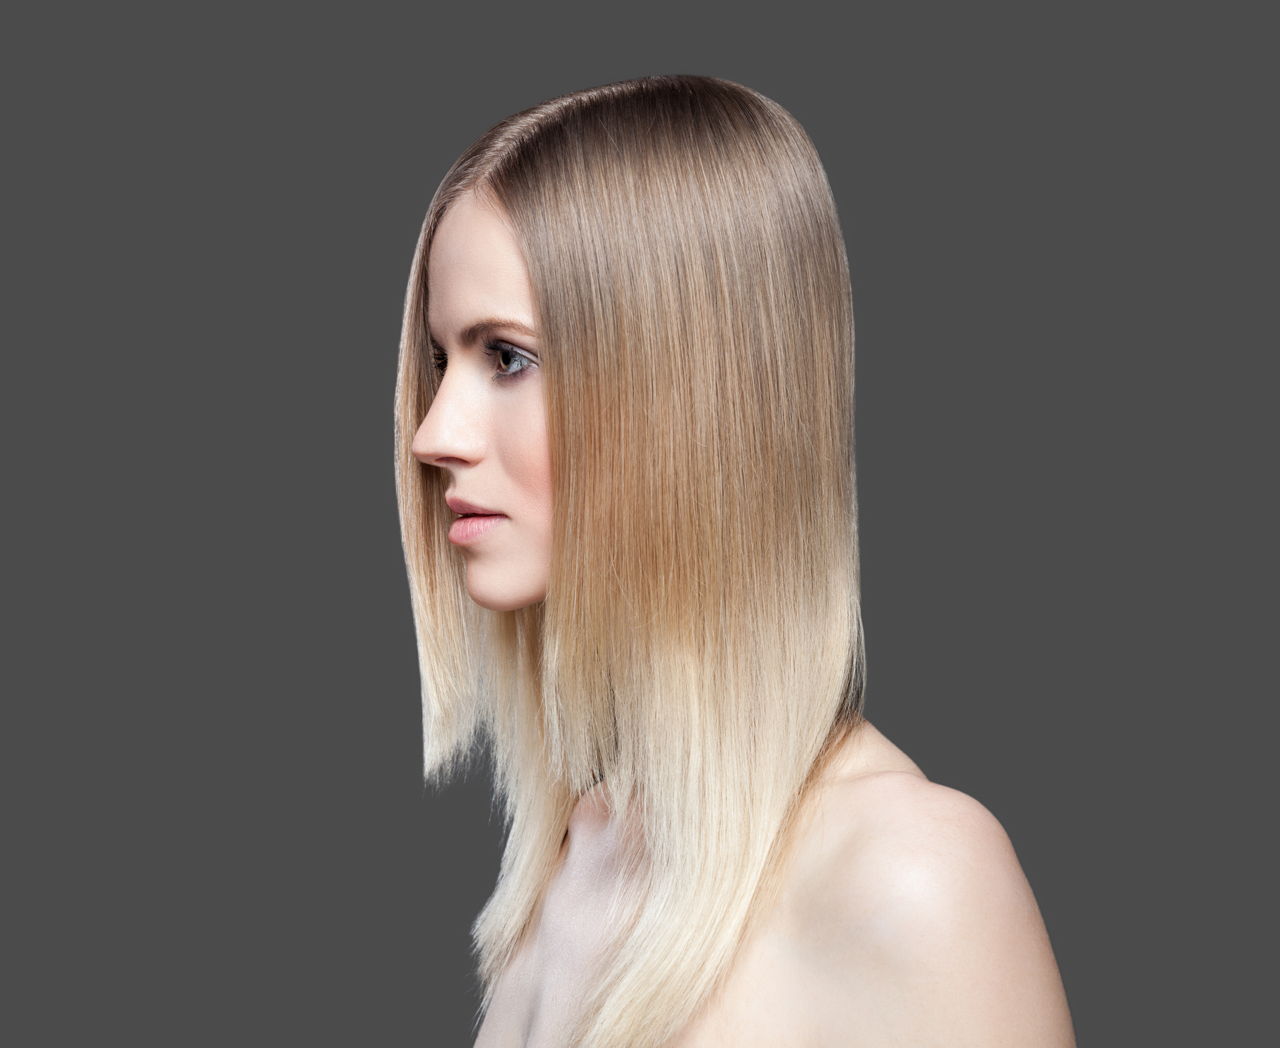 Skeptic About Keratin Hair Treatment? Read These Reviews